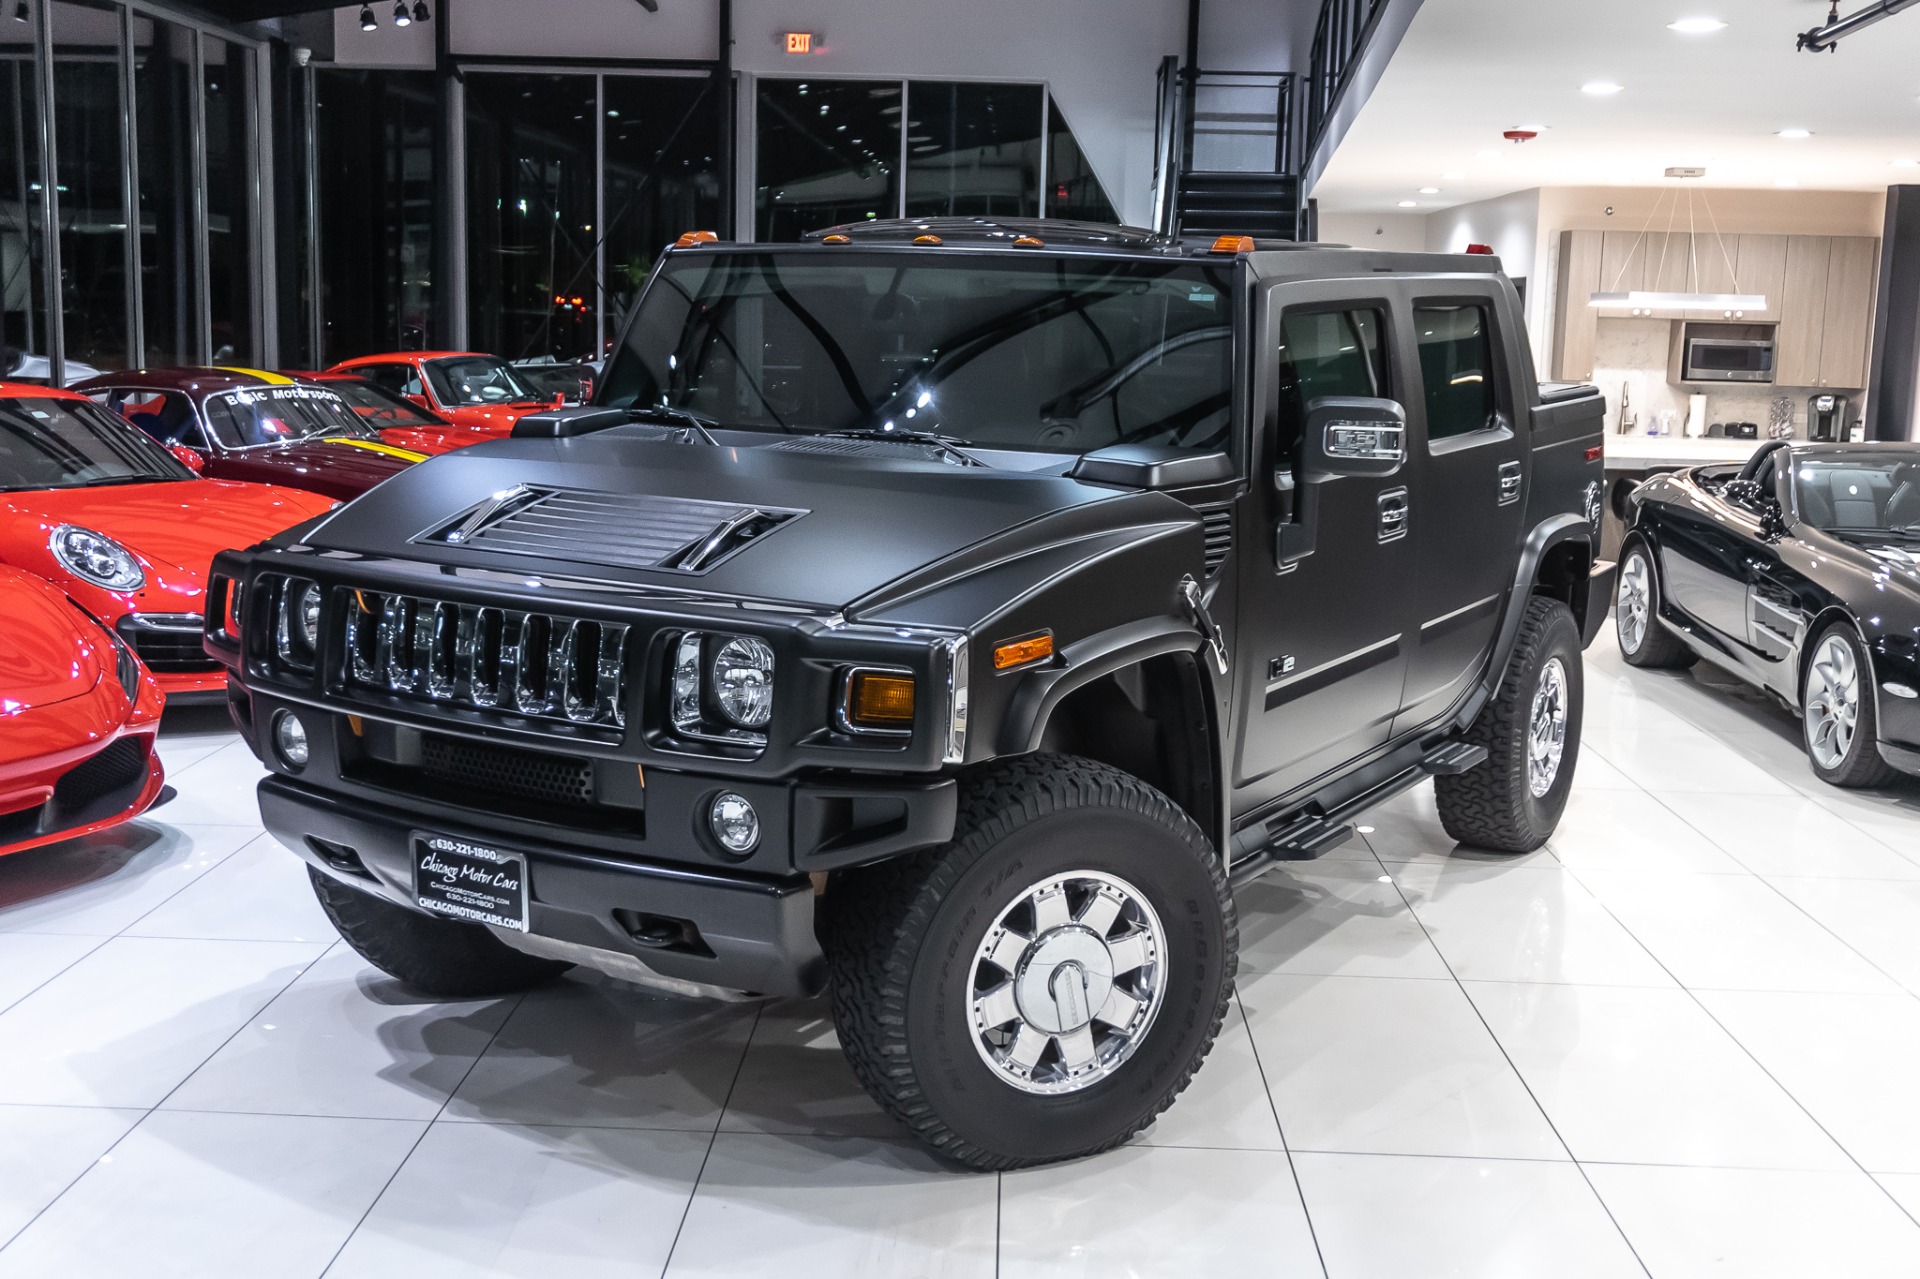 Used 2006 HUMMER H2 SUT RECENTLY INSTALLED MATTE BLACK WRAP! LOW MILES!!  Rear Entertainment TVs! For Sale (Special Pricing) | Chicago Motor Cars  Stock #17562D